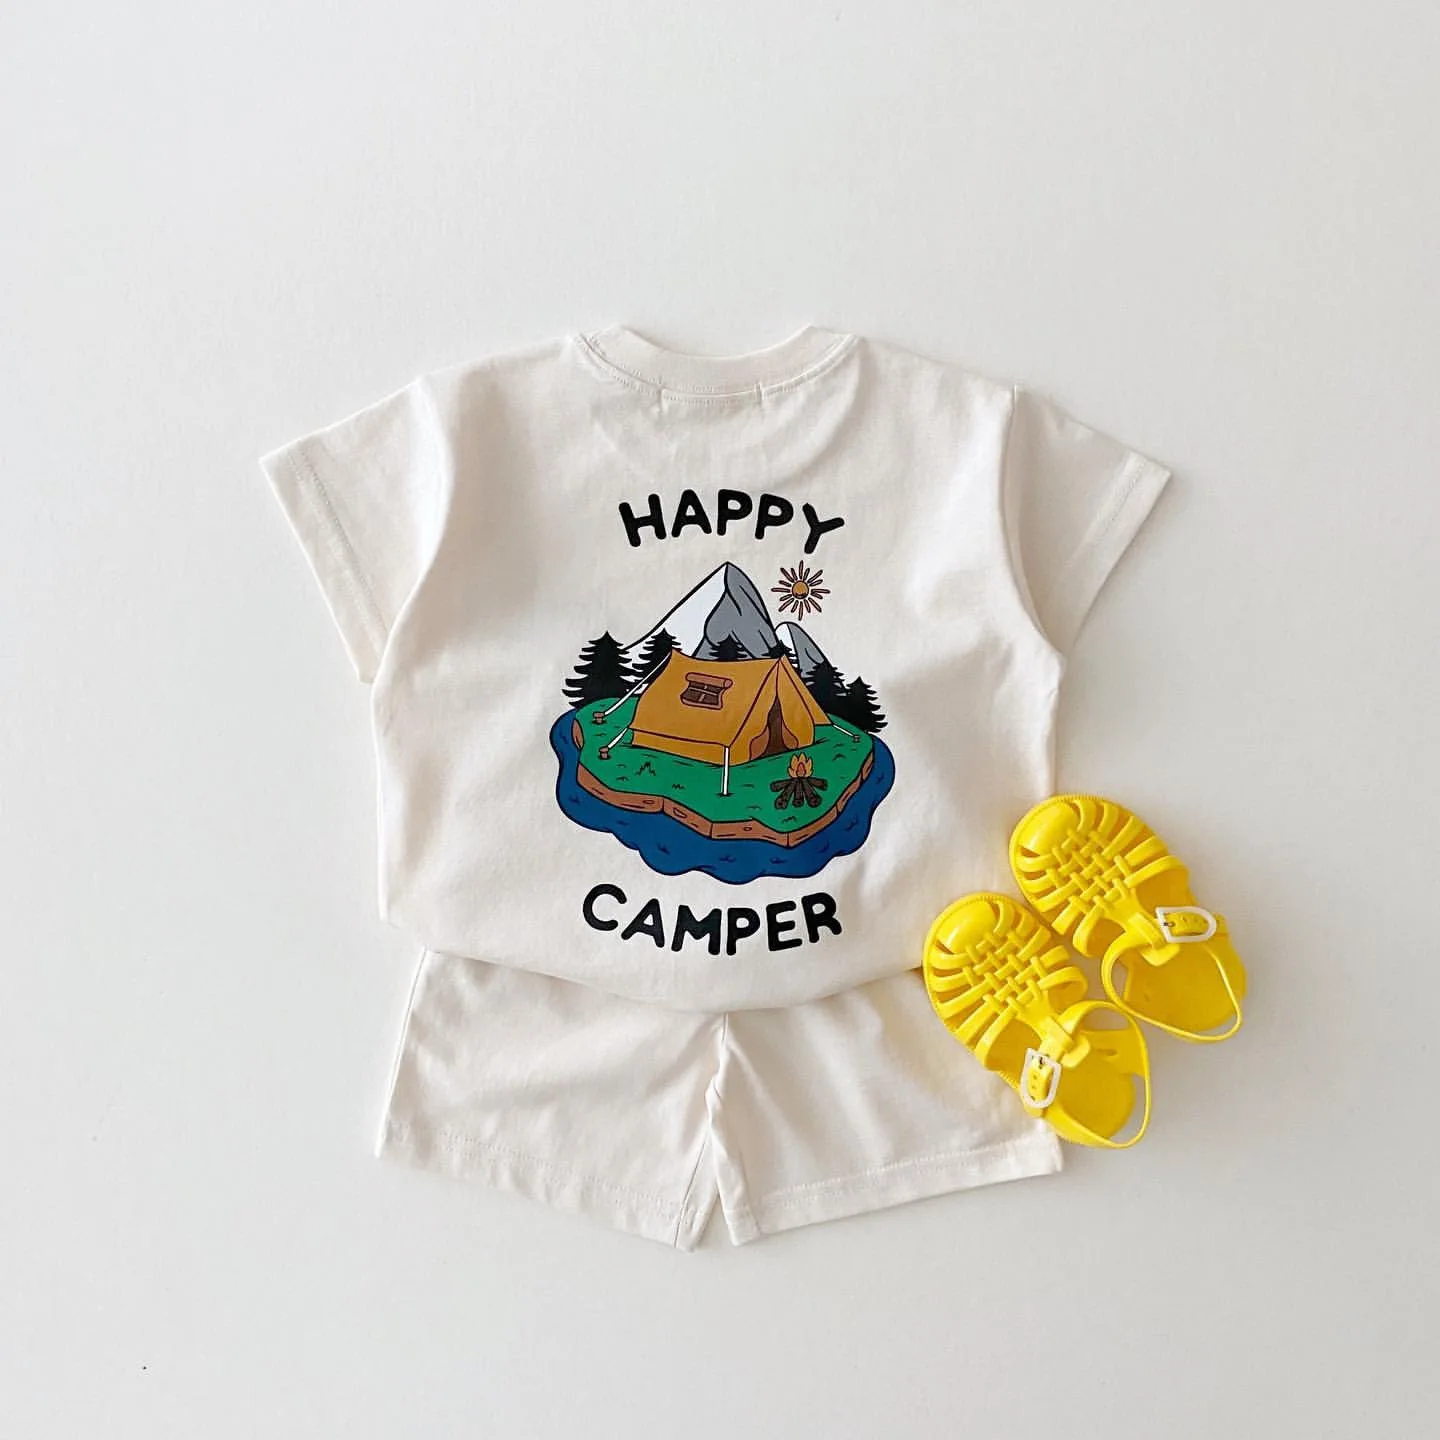 Kids Clothes Candy Color Cotton Casual Short Sleeve Suit Baby Camping Tent T-shirt Shorts Printing  Happy Camper Casual Loose